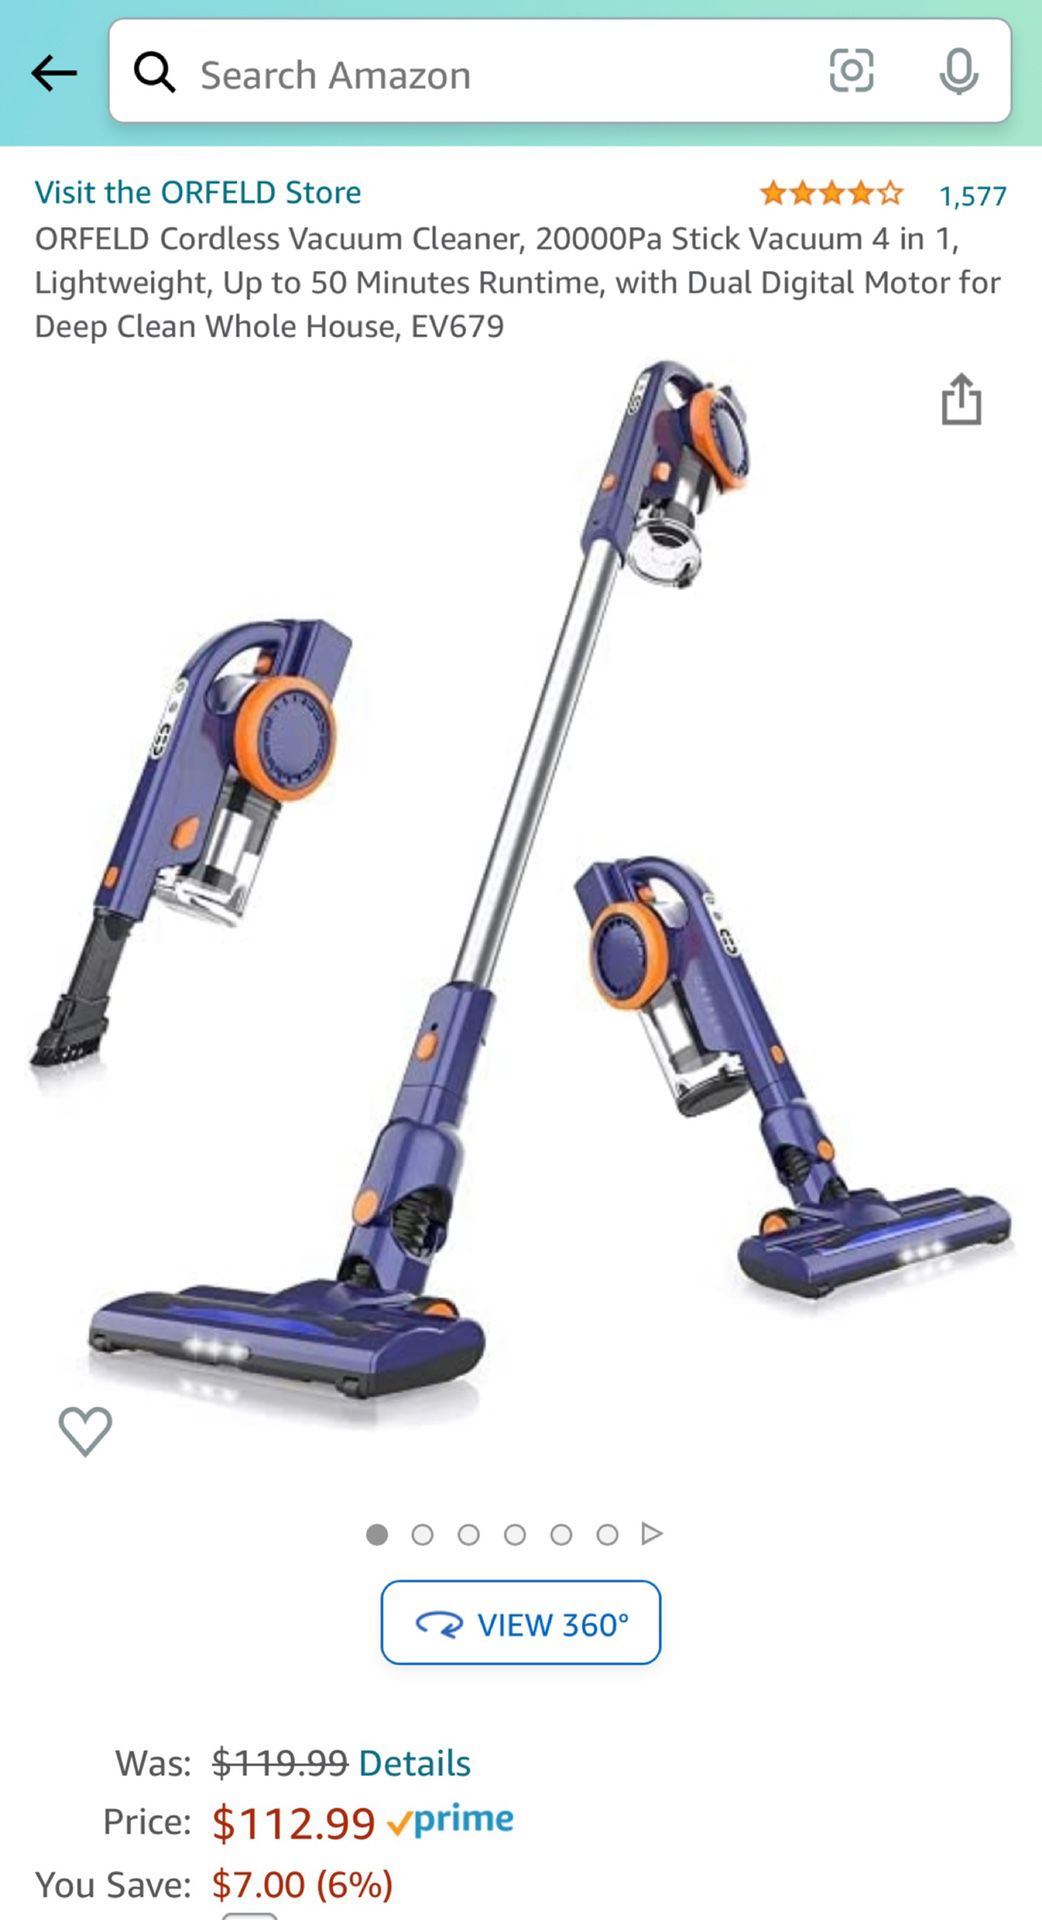 Cordless Vacuum Cleaner, 20000Pa Stick Vacuum 4 in 1, Lightweight,Up to 50 Minutes Runtime, with Dual Digital Motor for Deep Clean Whole House, 679